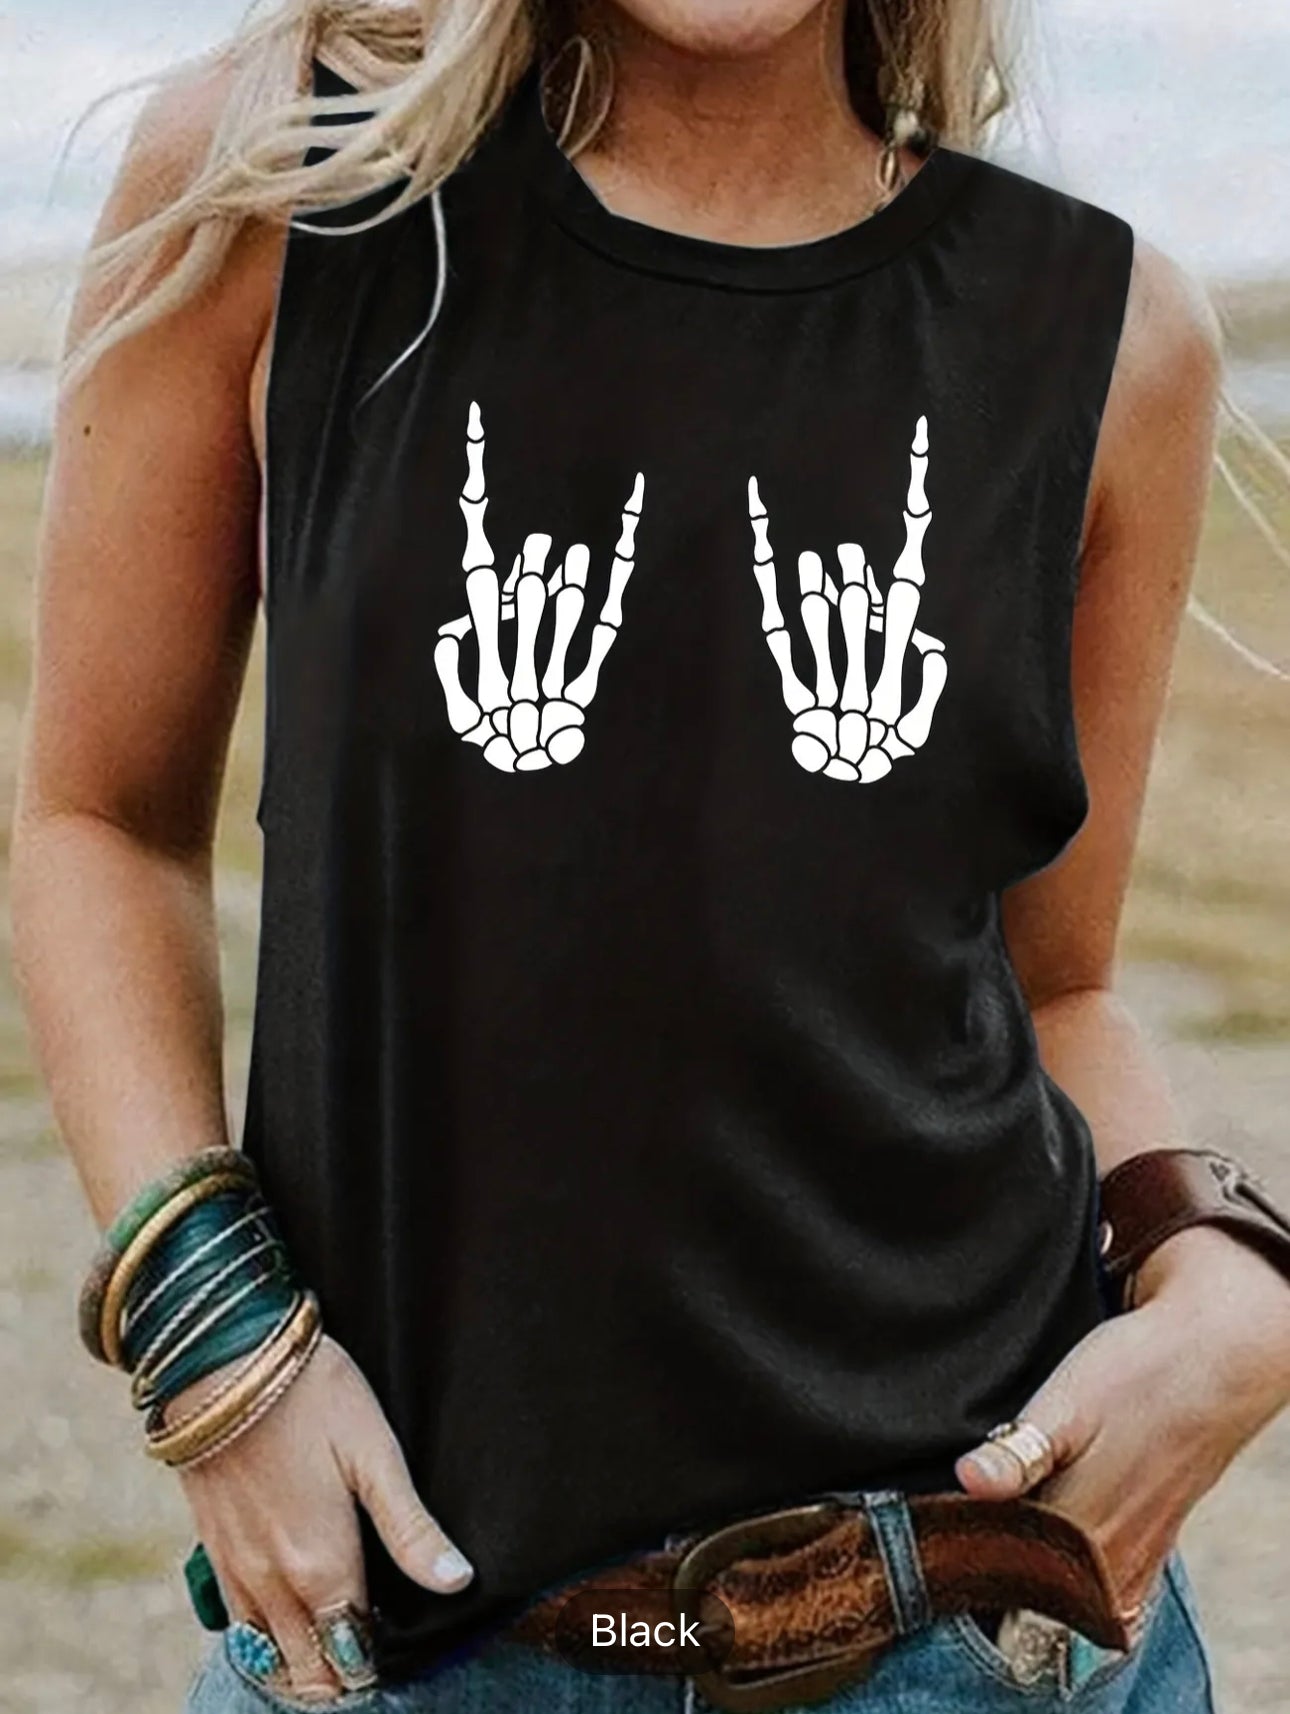 Women's Summer Tank Top: Skull Hand Print Crew Neck Sleeveless Top for Casual Style